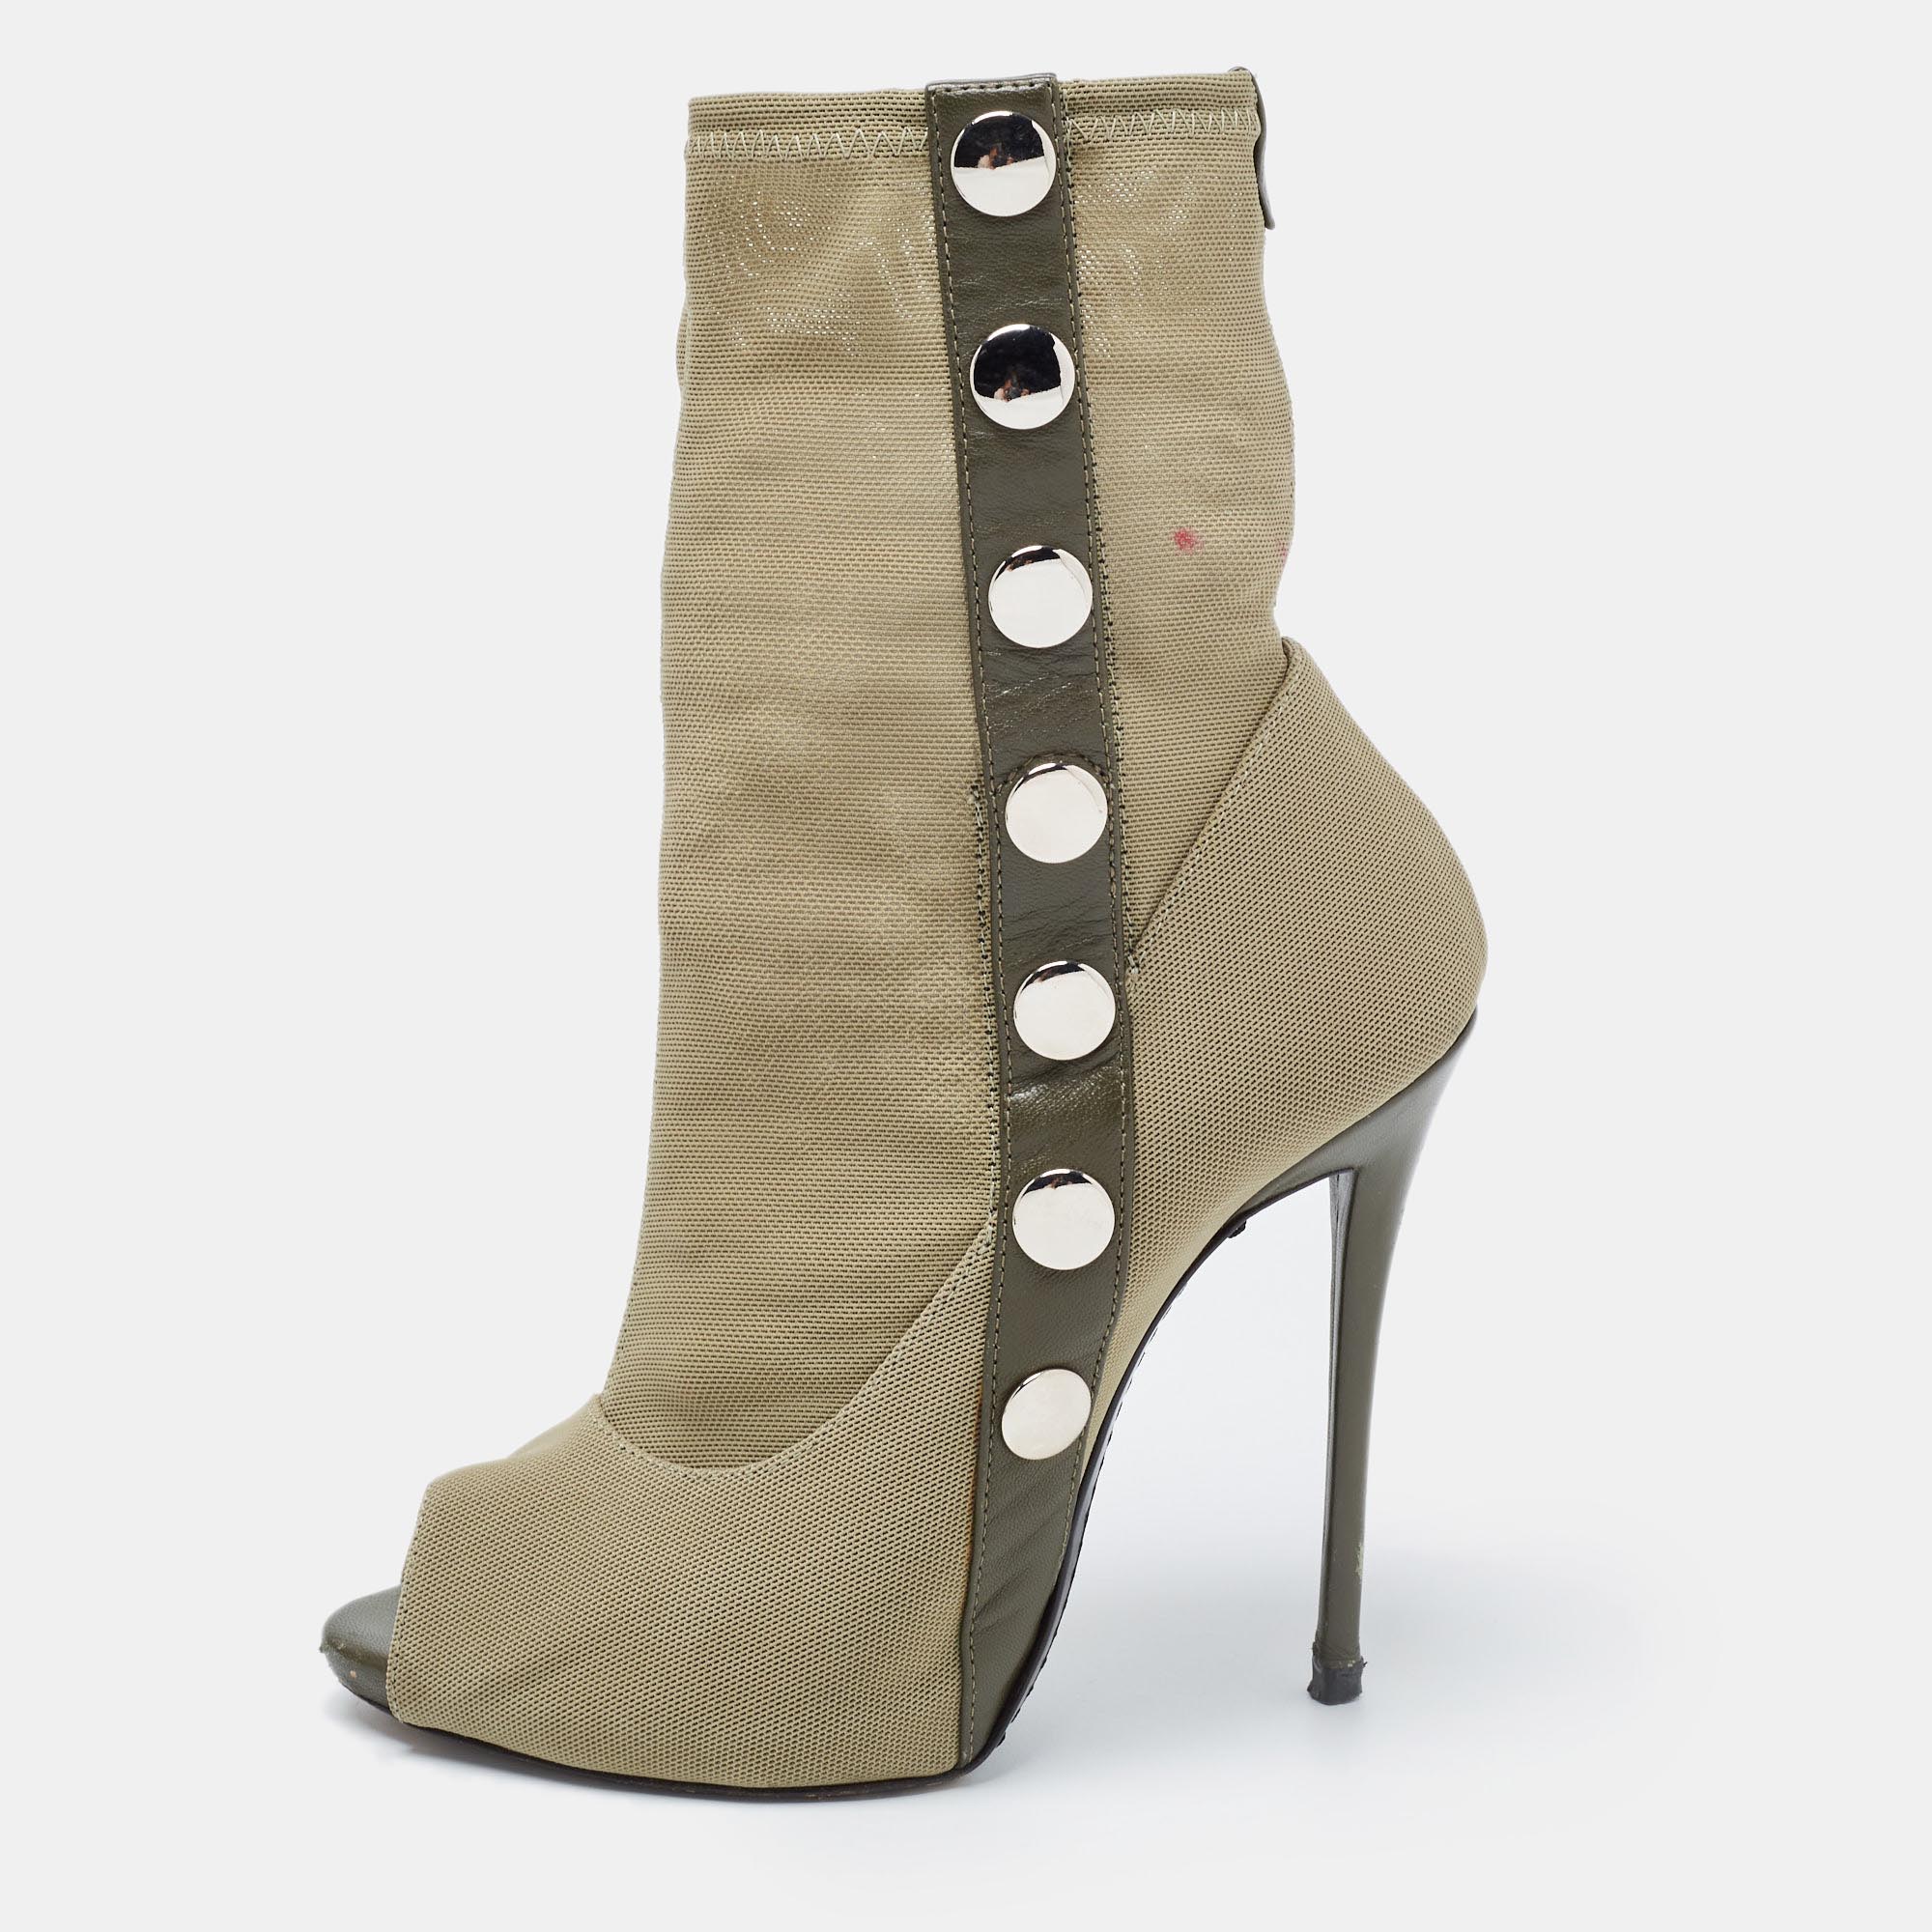 Giuseppe Zanotti Olive Green Mesh And Studded Leather Peep Toe Booties Size 37